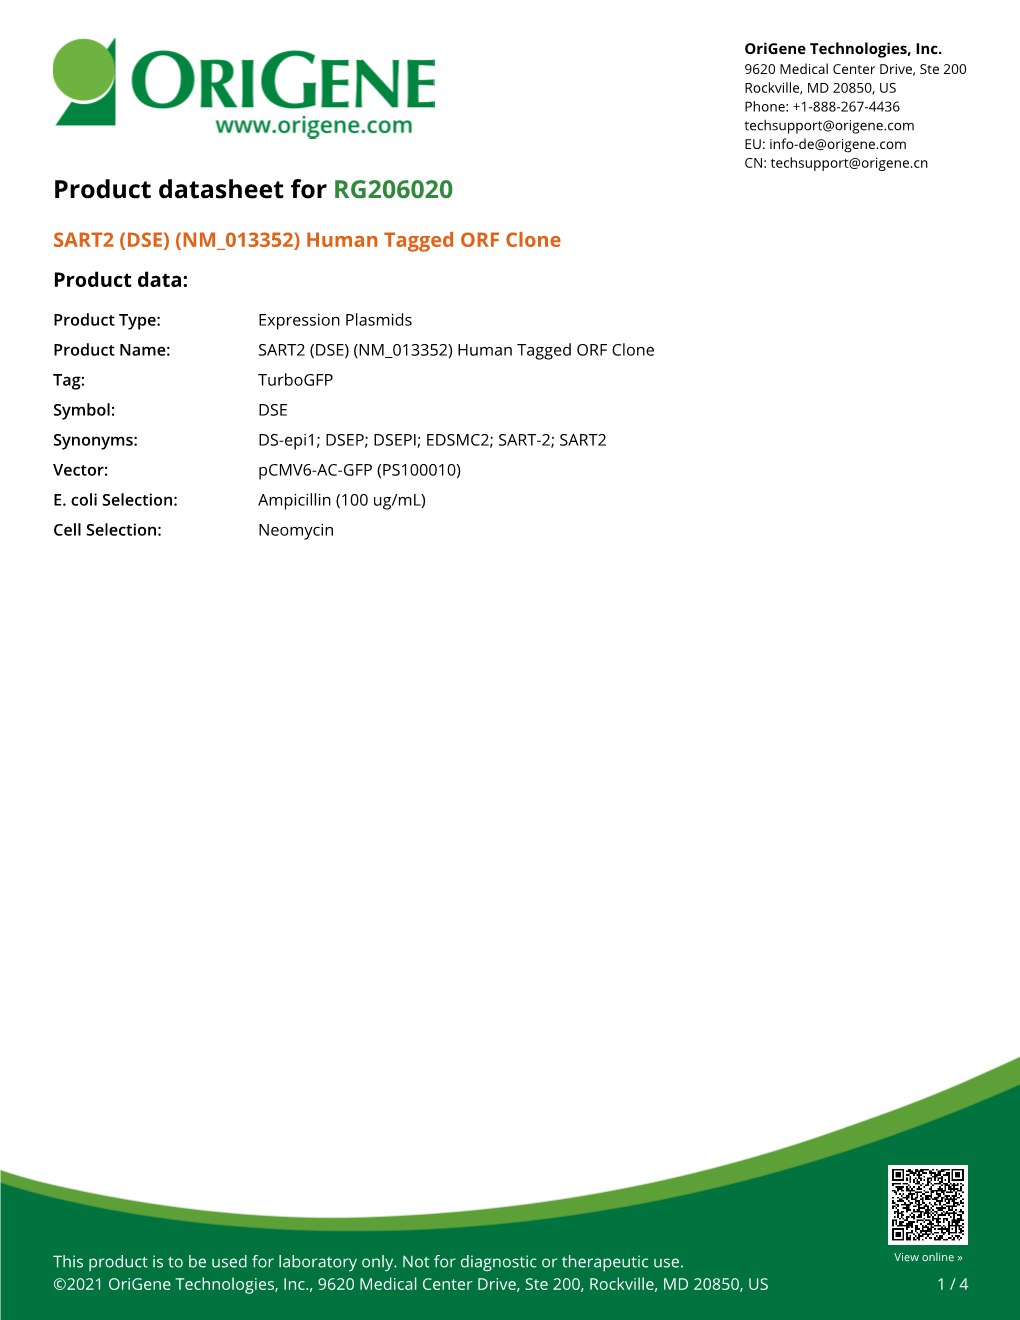 SART2 (DSE) (NM 013352) Human Tagged ORF Clone Product Data